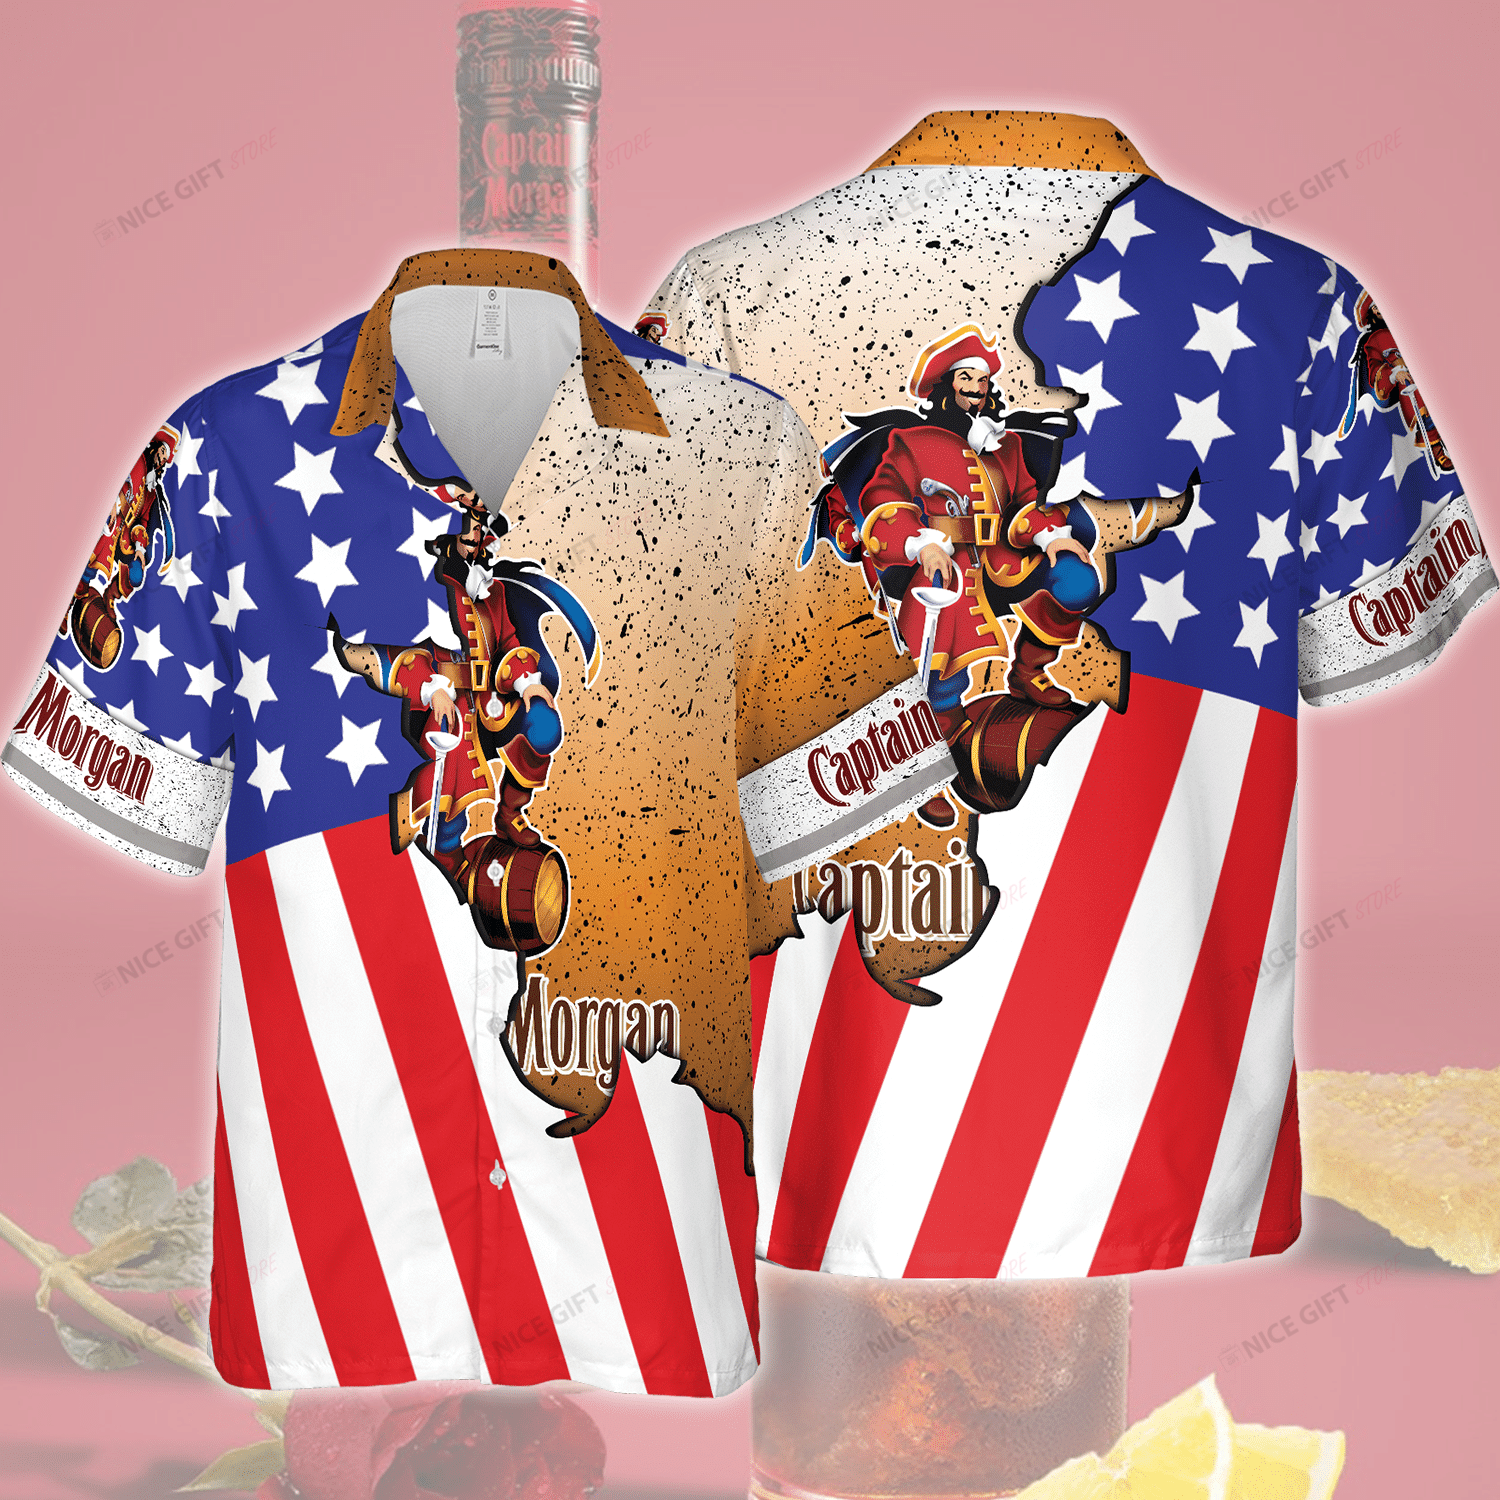 There are several types of Hawaiian shirts available on the market 95